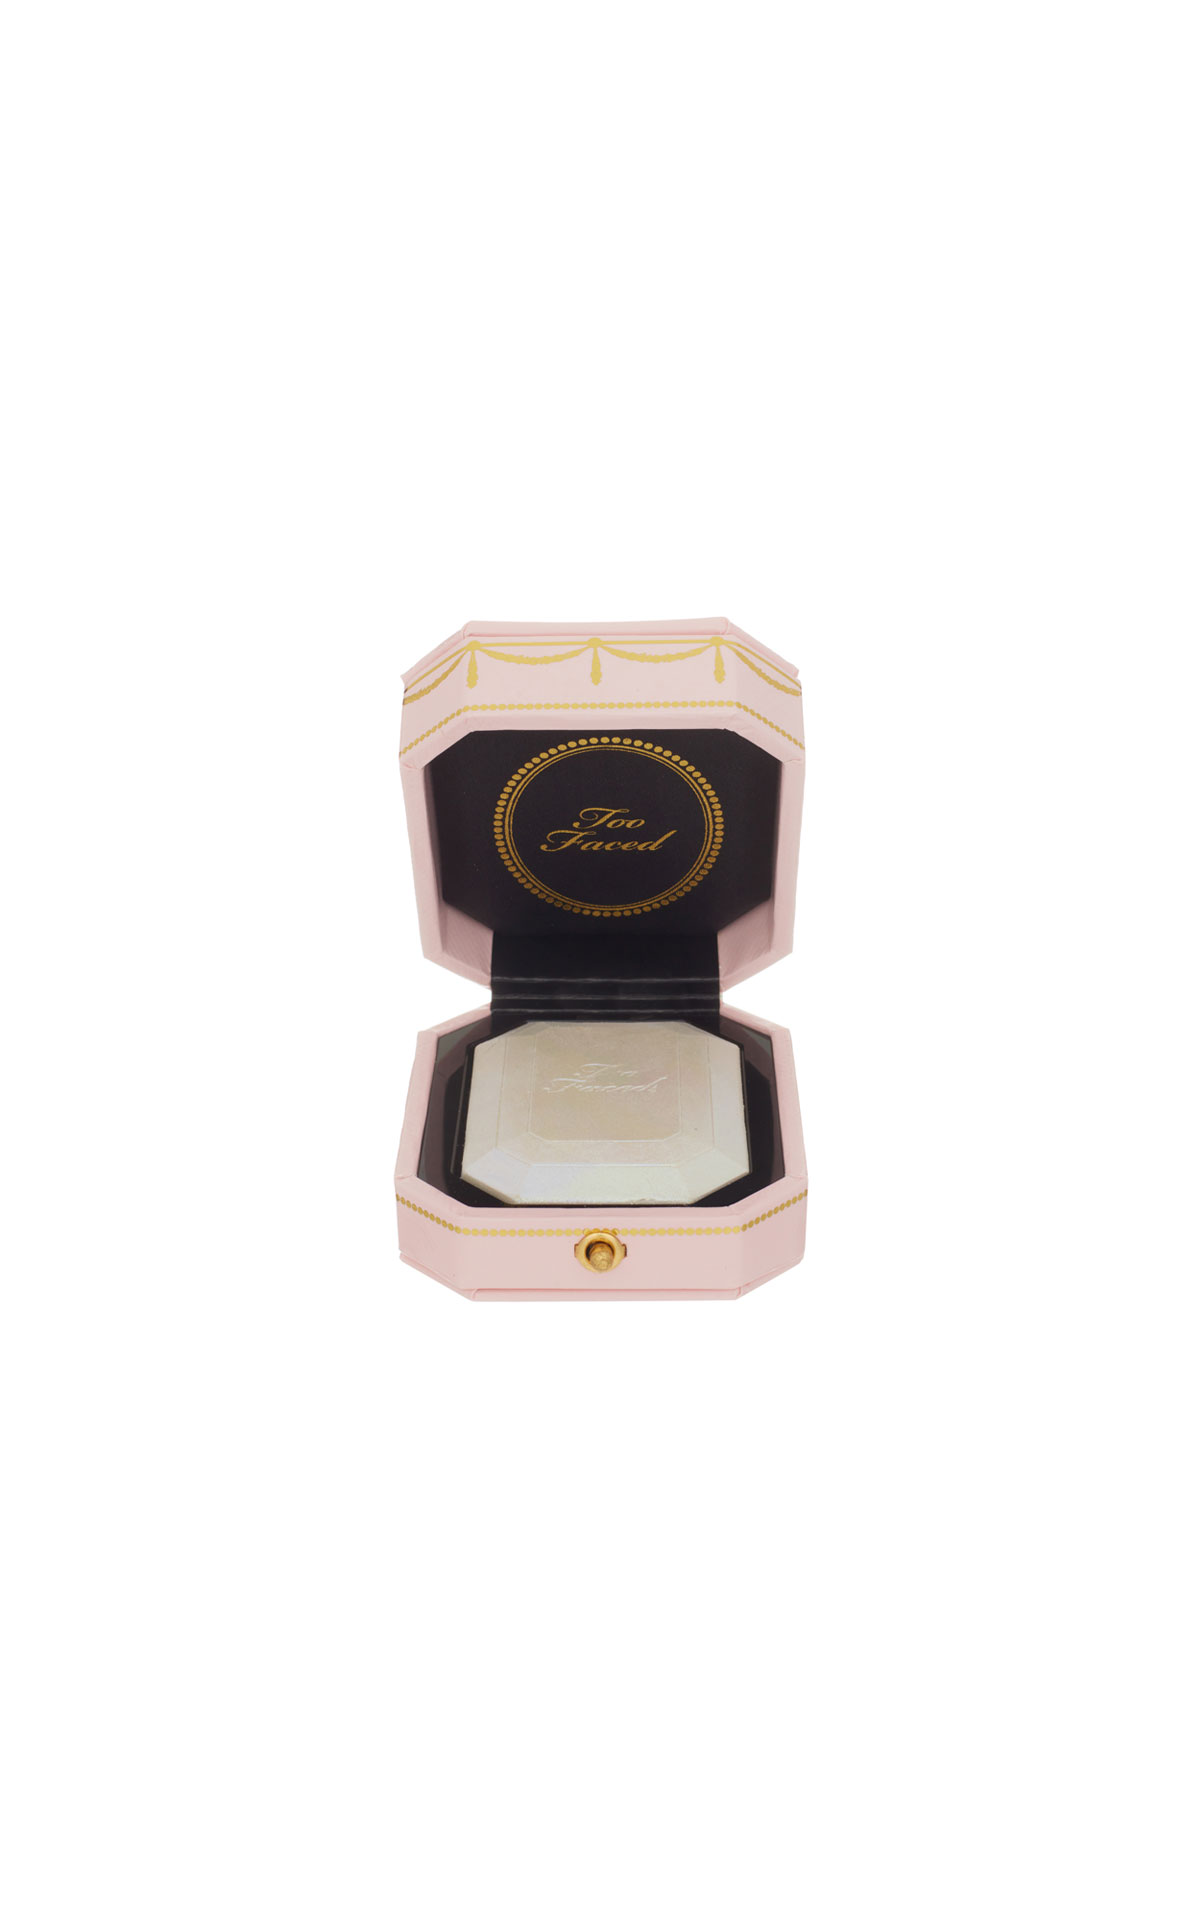 The Cosmetics Company Store Too Faced Diamond Light Highlighter from Bicester Village